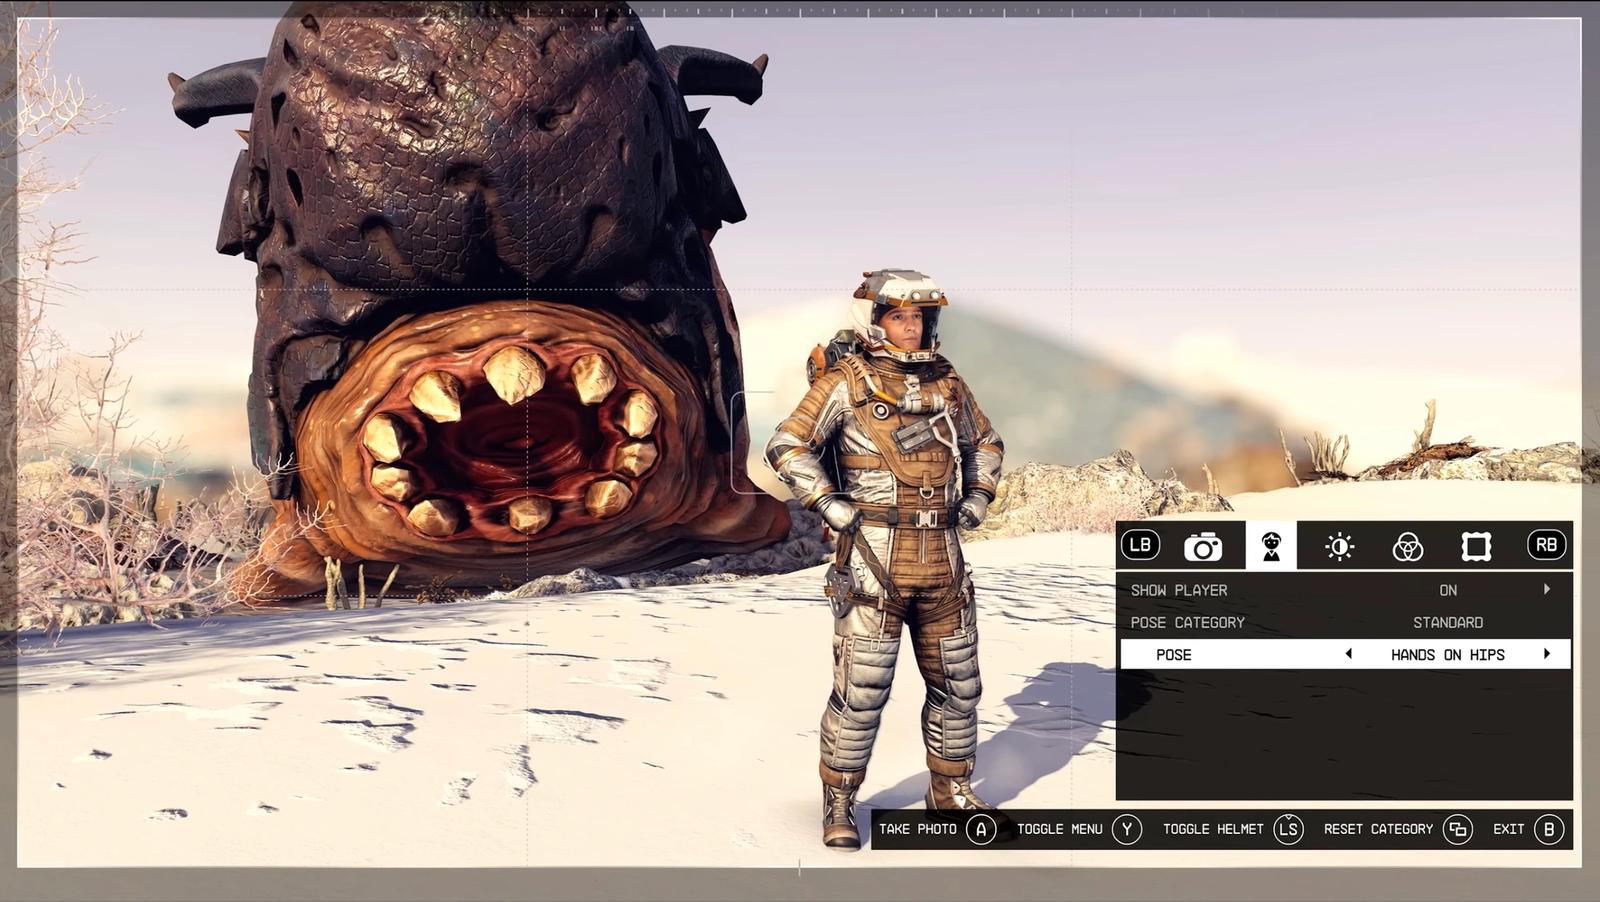 Player poses in front of a giant toothy alien